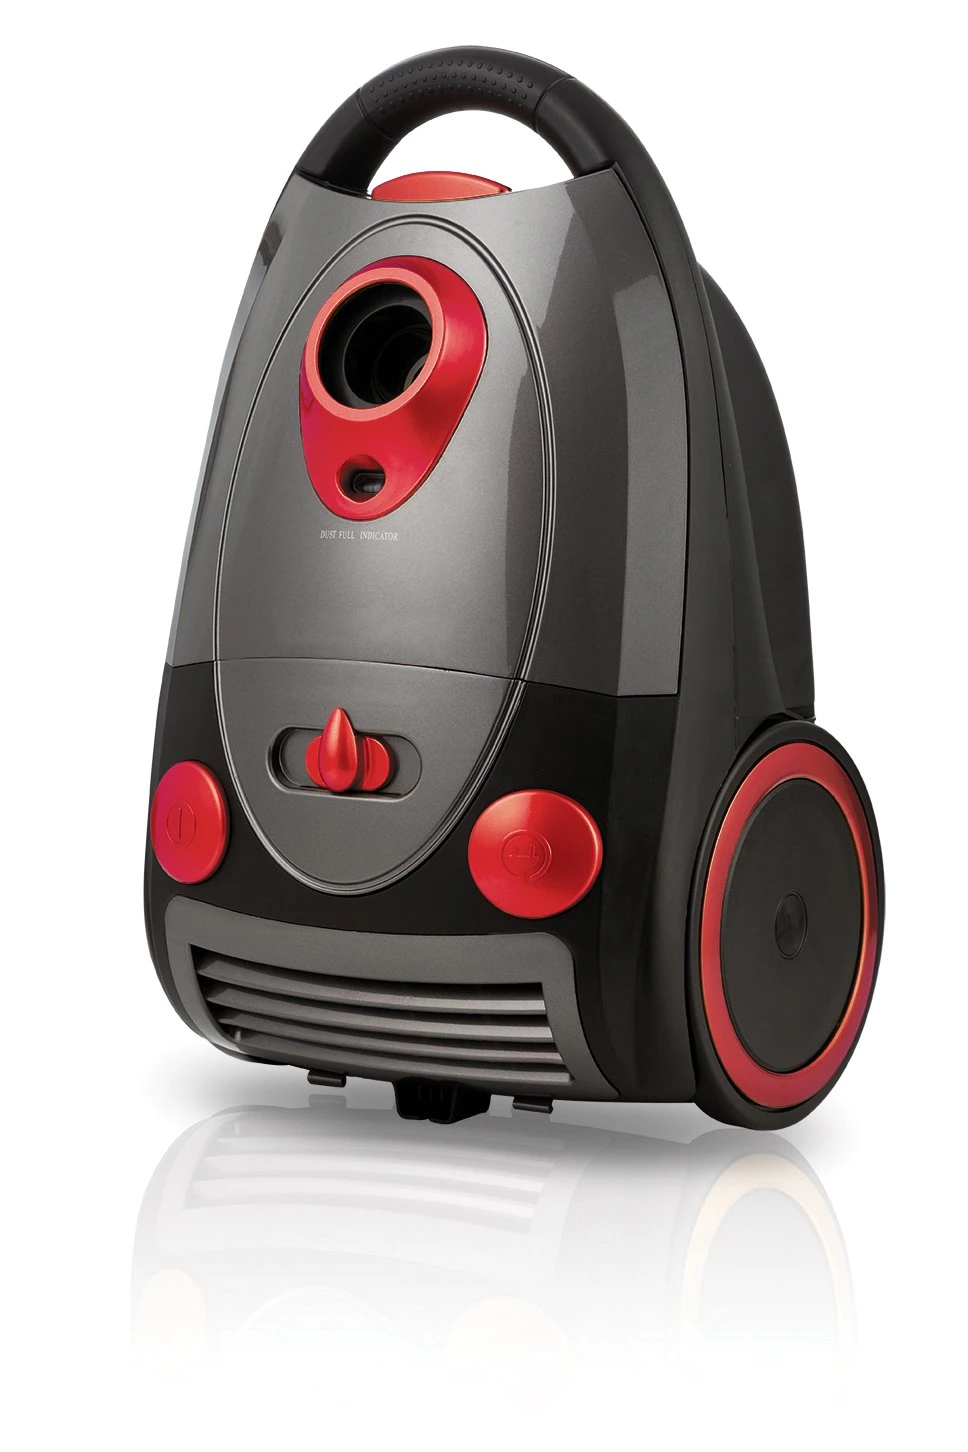 2000W High Suction Most Powerful Vacuum Cleaner